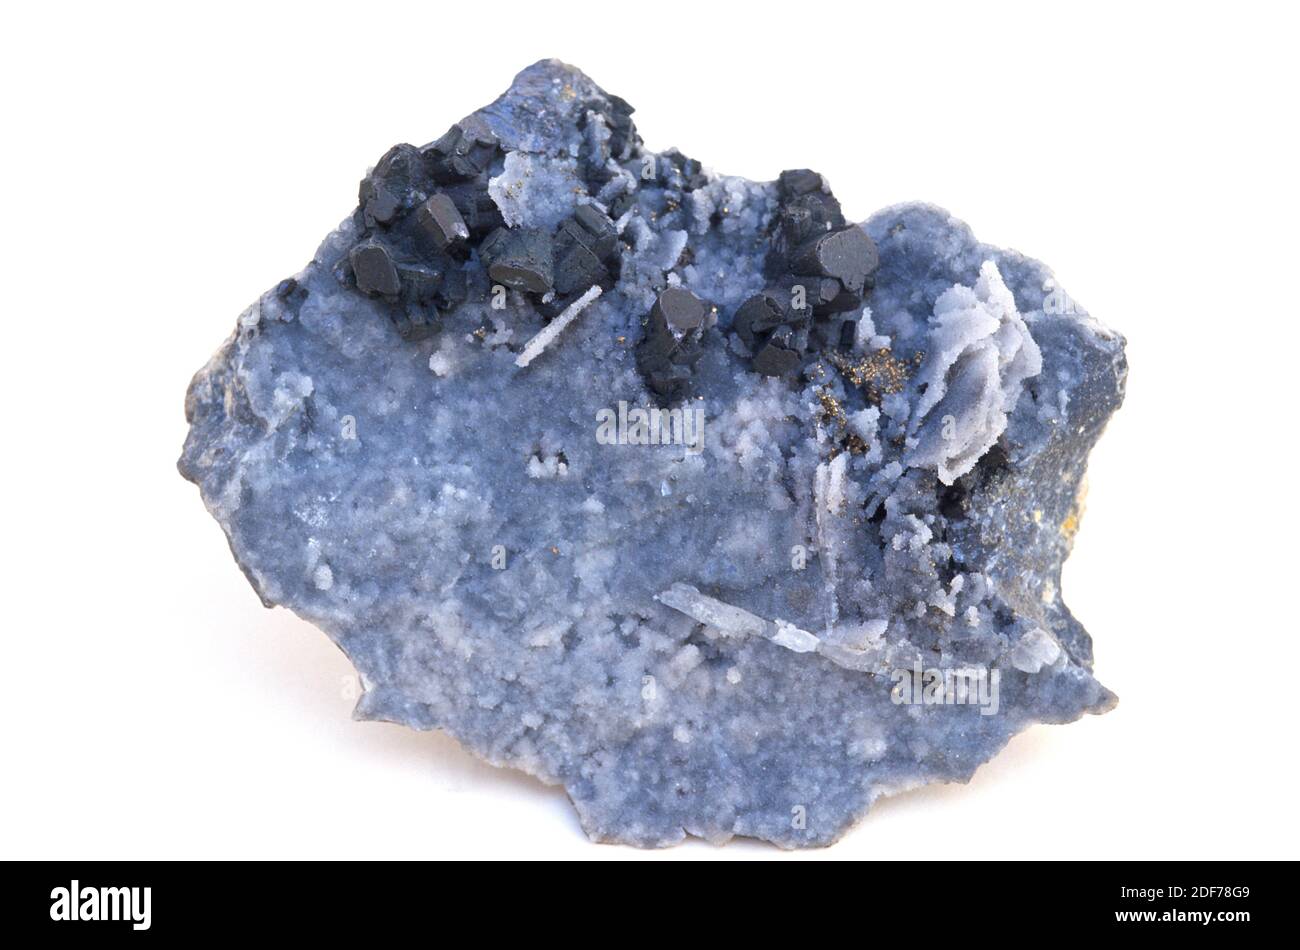 Enargite (dark crystals) is a copper arsenic sulfosalt mineral. Crystallized sample surrounded by baryte. Stock Photo